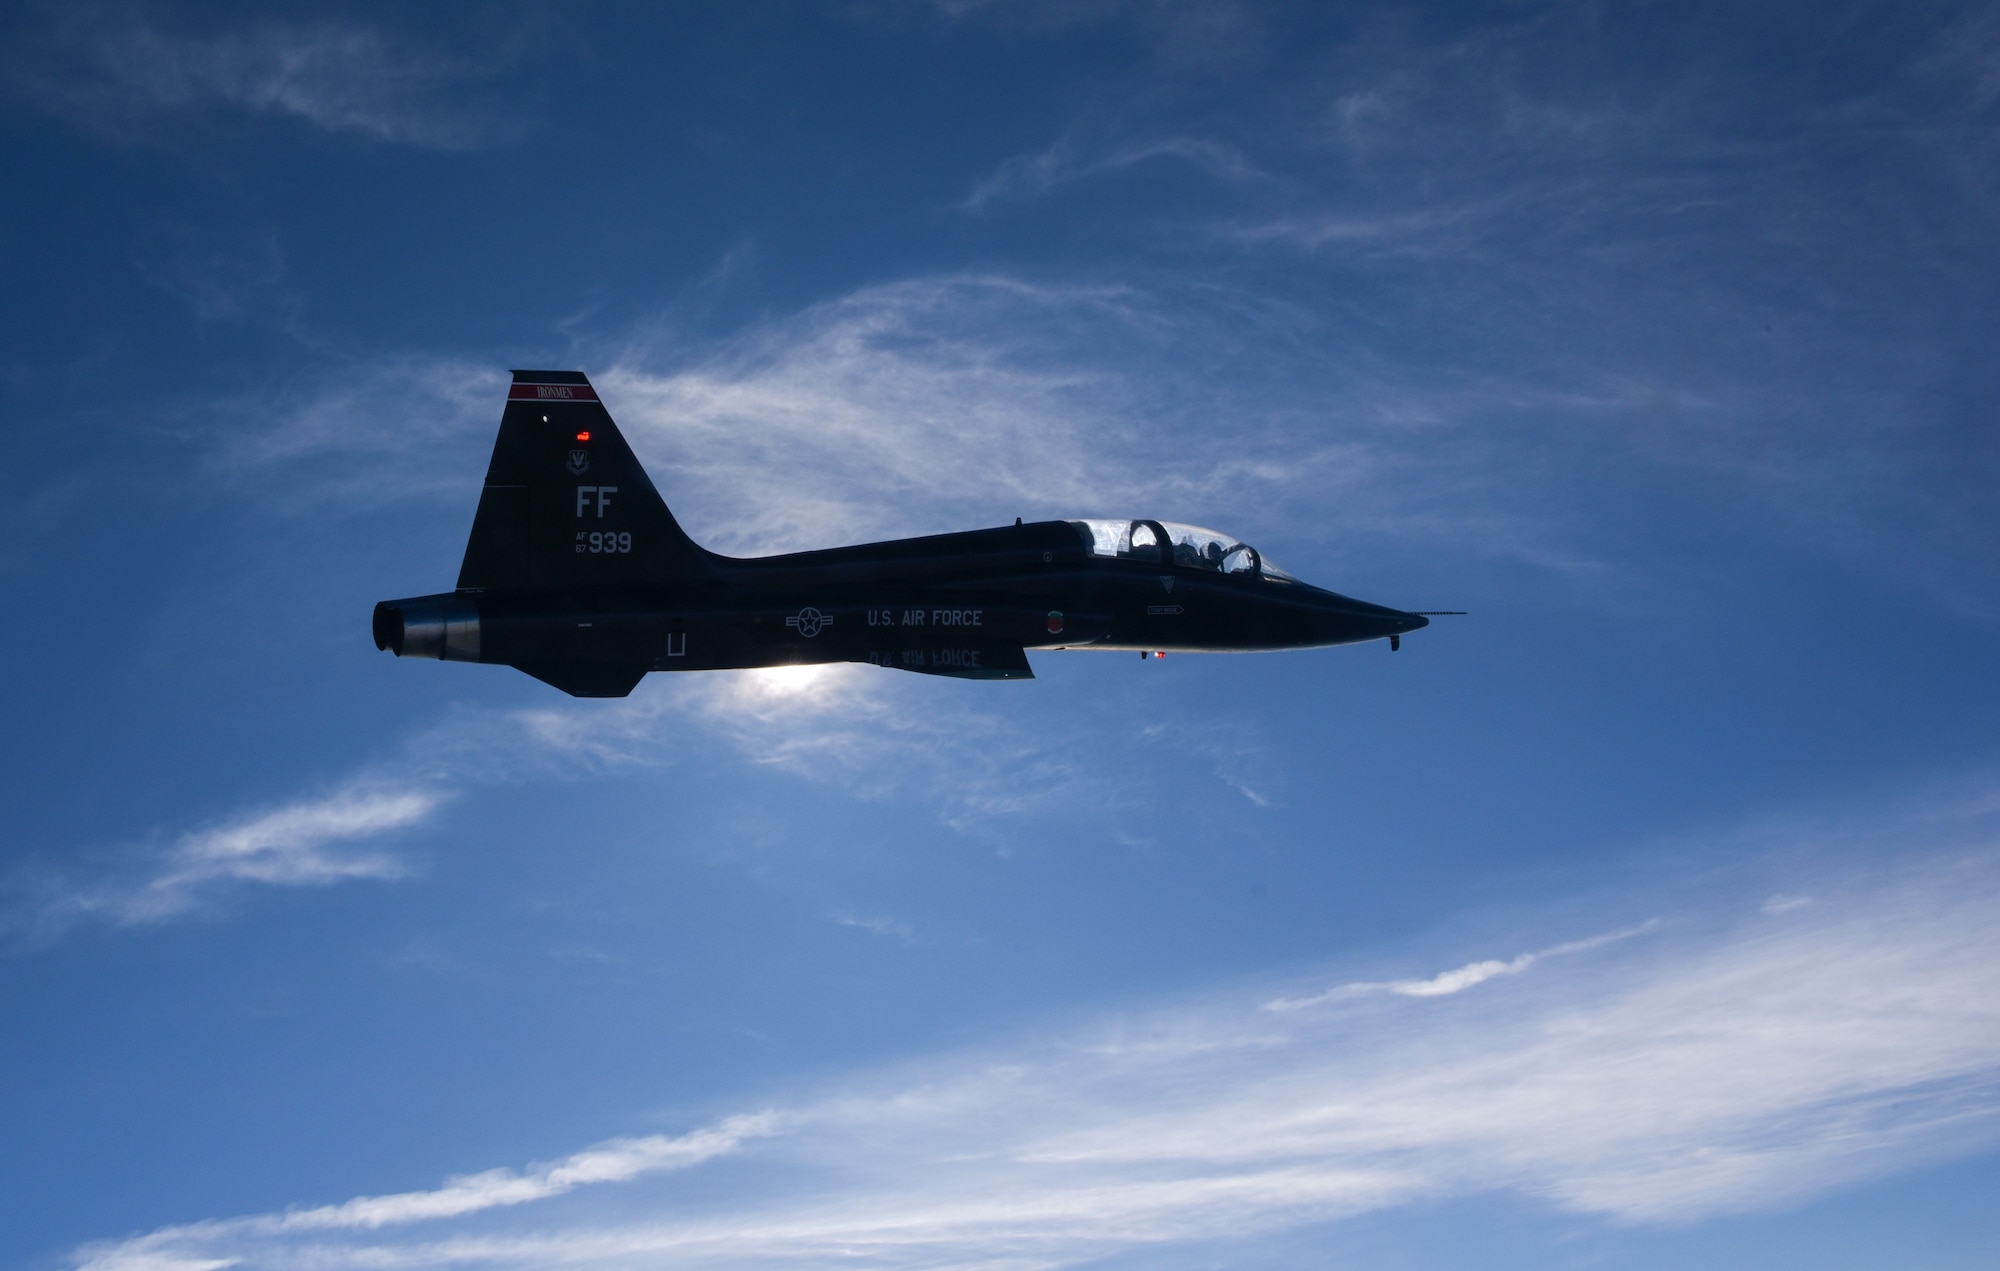 A pilot assigned to the 71st Fighter Training Squadron flies a T-38 Talon over the Atlantic Ocean, Jan. 24, 2018. The two-seat jet has a top speed of 858 miles per hour. As the world's first supersonic trainer, the T-38 first flew in 1959 and continues to be used to this day. (U.S. Air Force Photo by Staff Sgt. Carlin Leslie)